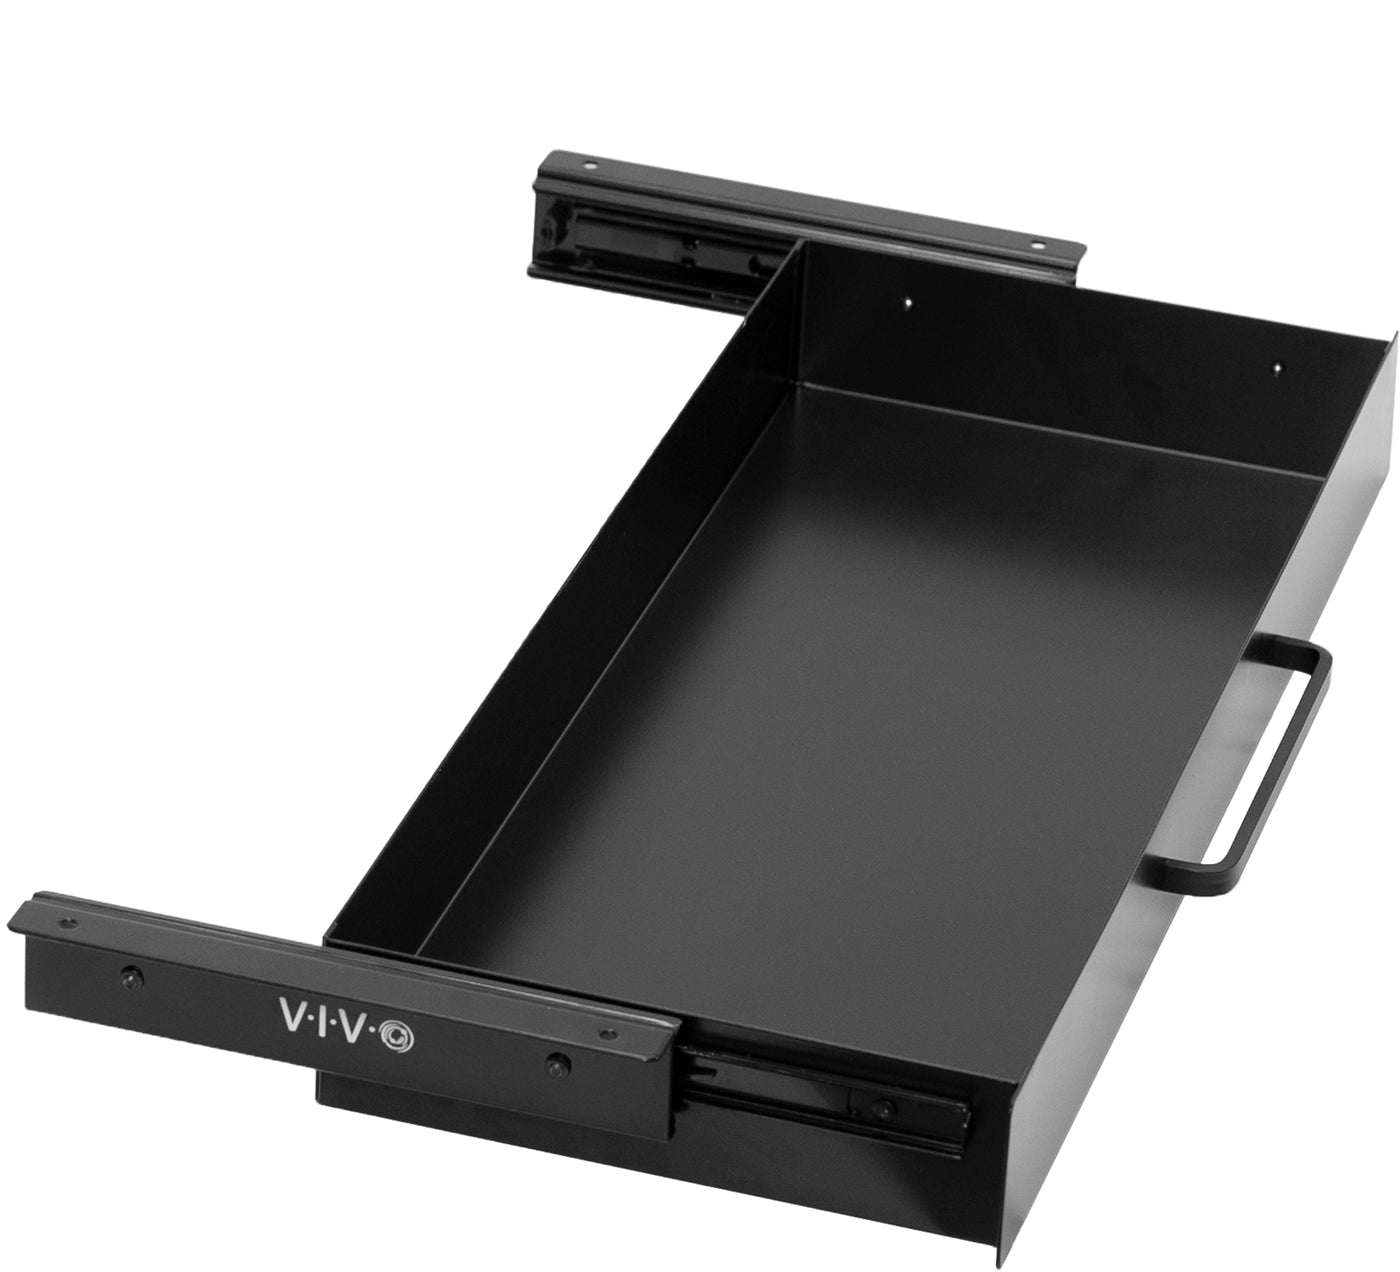 Low profile 22 inch under desk drawer with pull handle for convenient storage and organization.